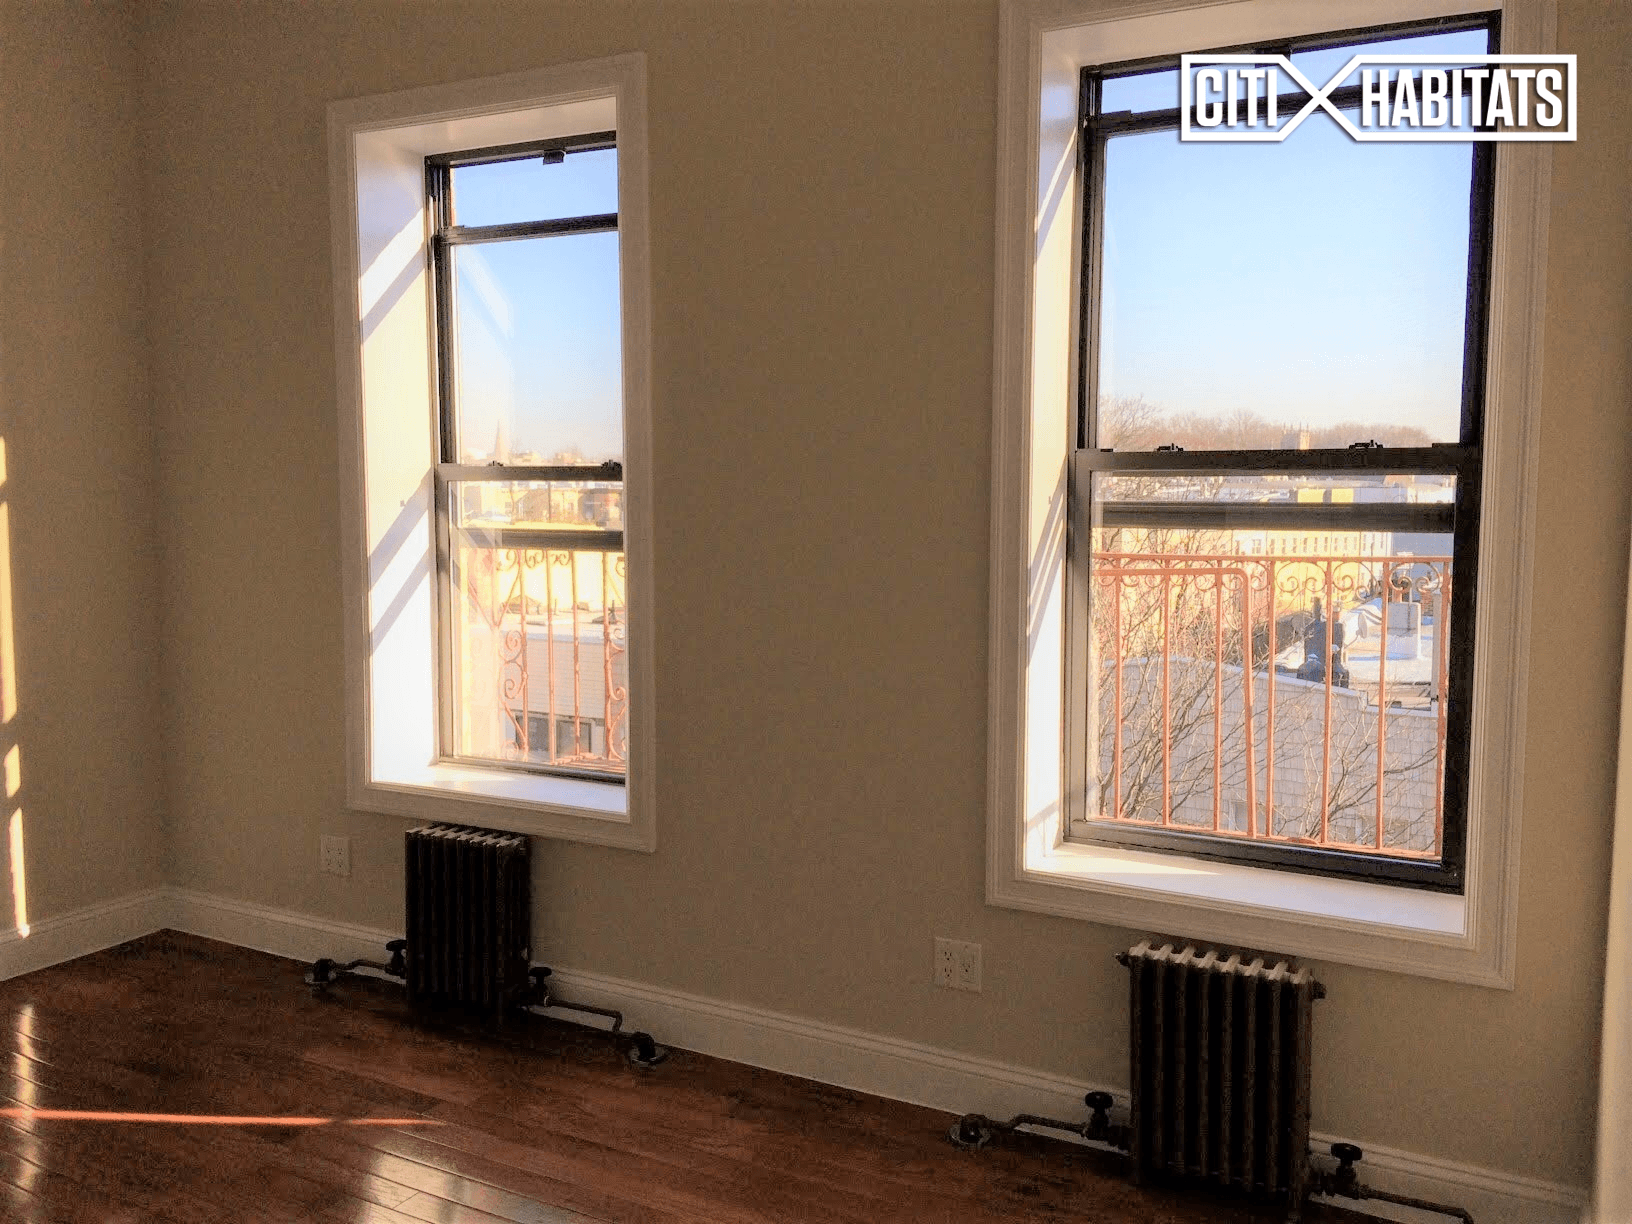 Beautiful Sun Drenched One Bedroom in nice Greenpoint locale with exposed brick, brand new renovations including new kitchen, hardwood floors throughout, very high ceilings with track lighting.